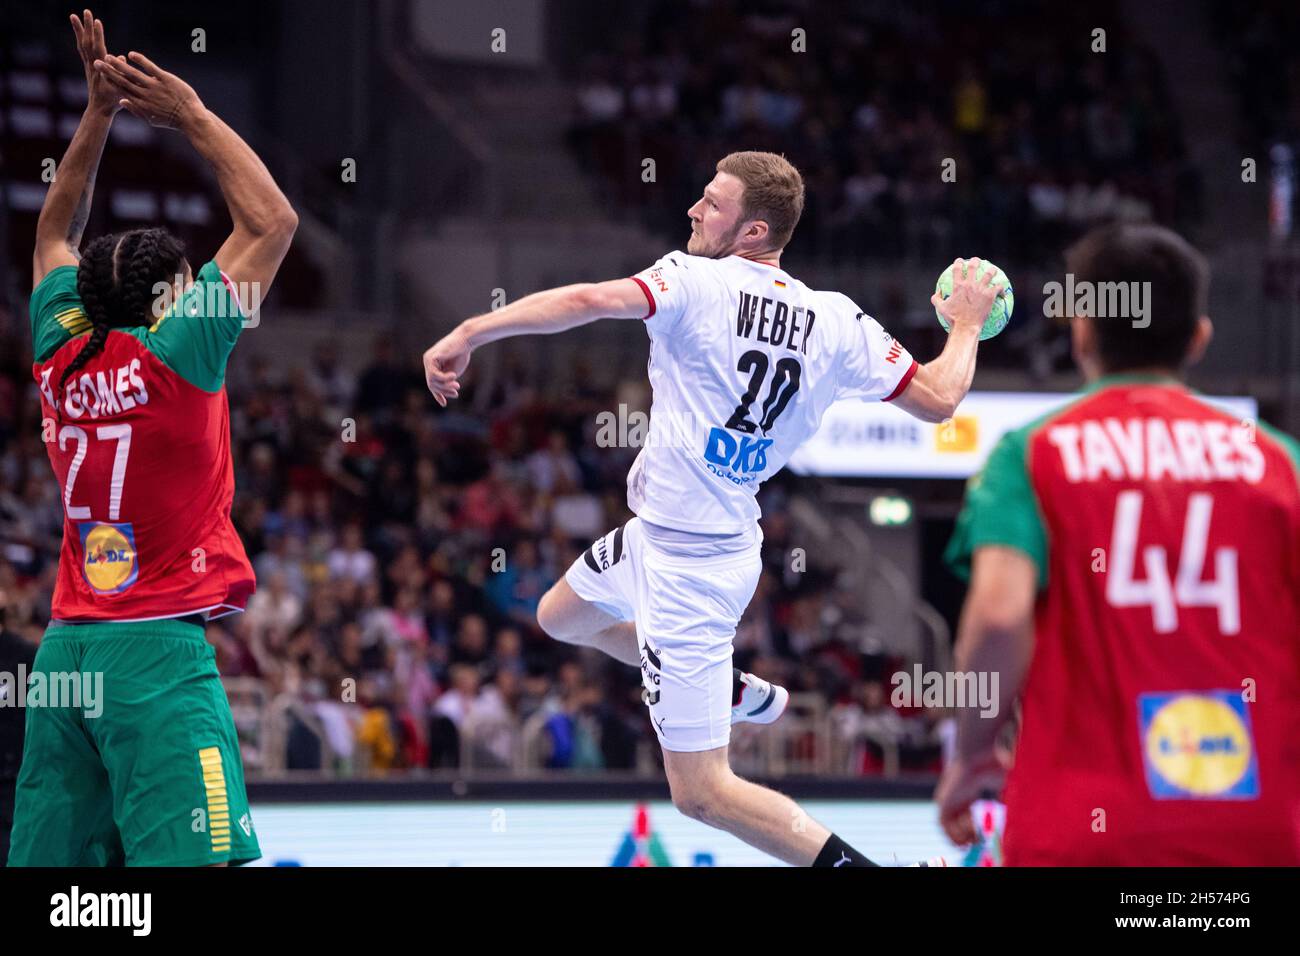 07 November 2021, North Rhine-Westphalia, Duesseldorf: Handball: International match, Germany - Portugal, ISS Dome. Germany's Philipp Weber (M) throws at goal. On the left Portugal's Andre Gomes, on the right Francisco Tavares. Photo: Marius Becker/dpa Stock Photo